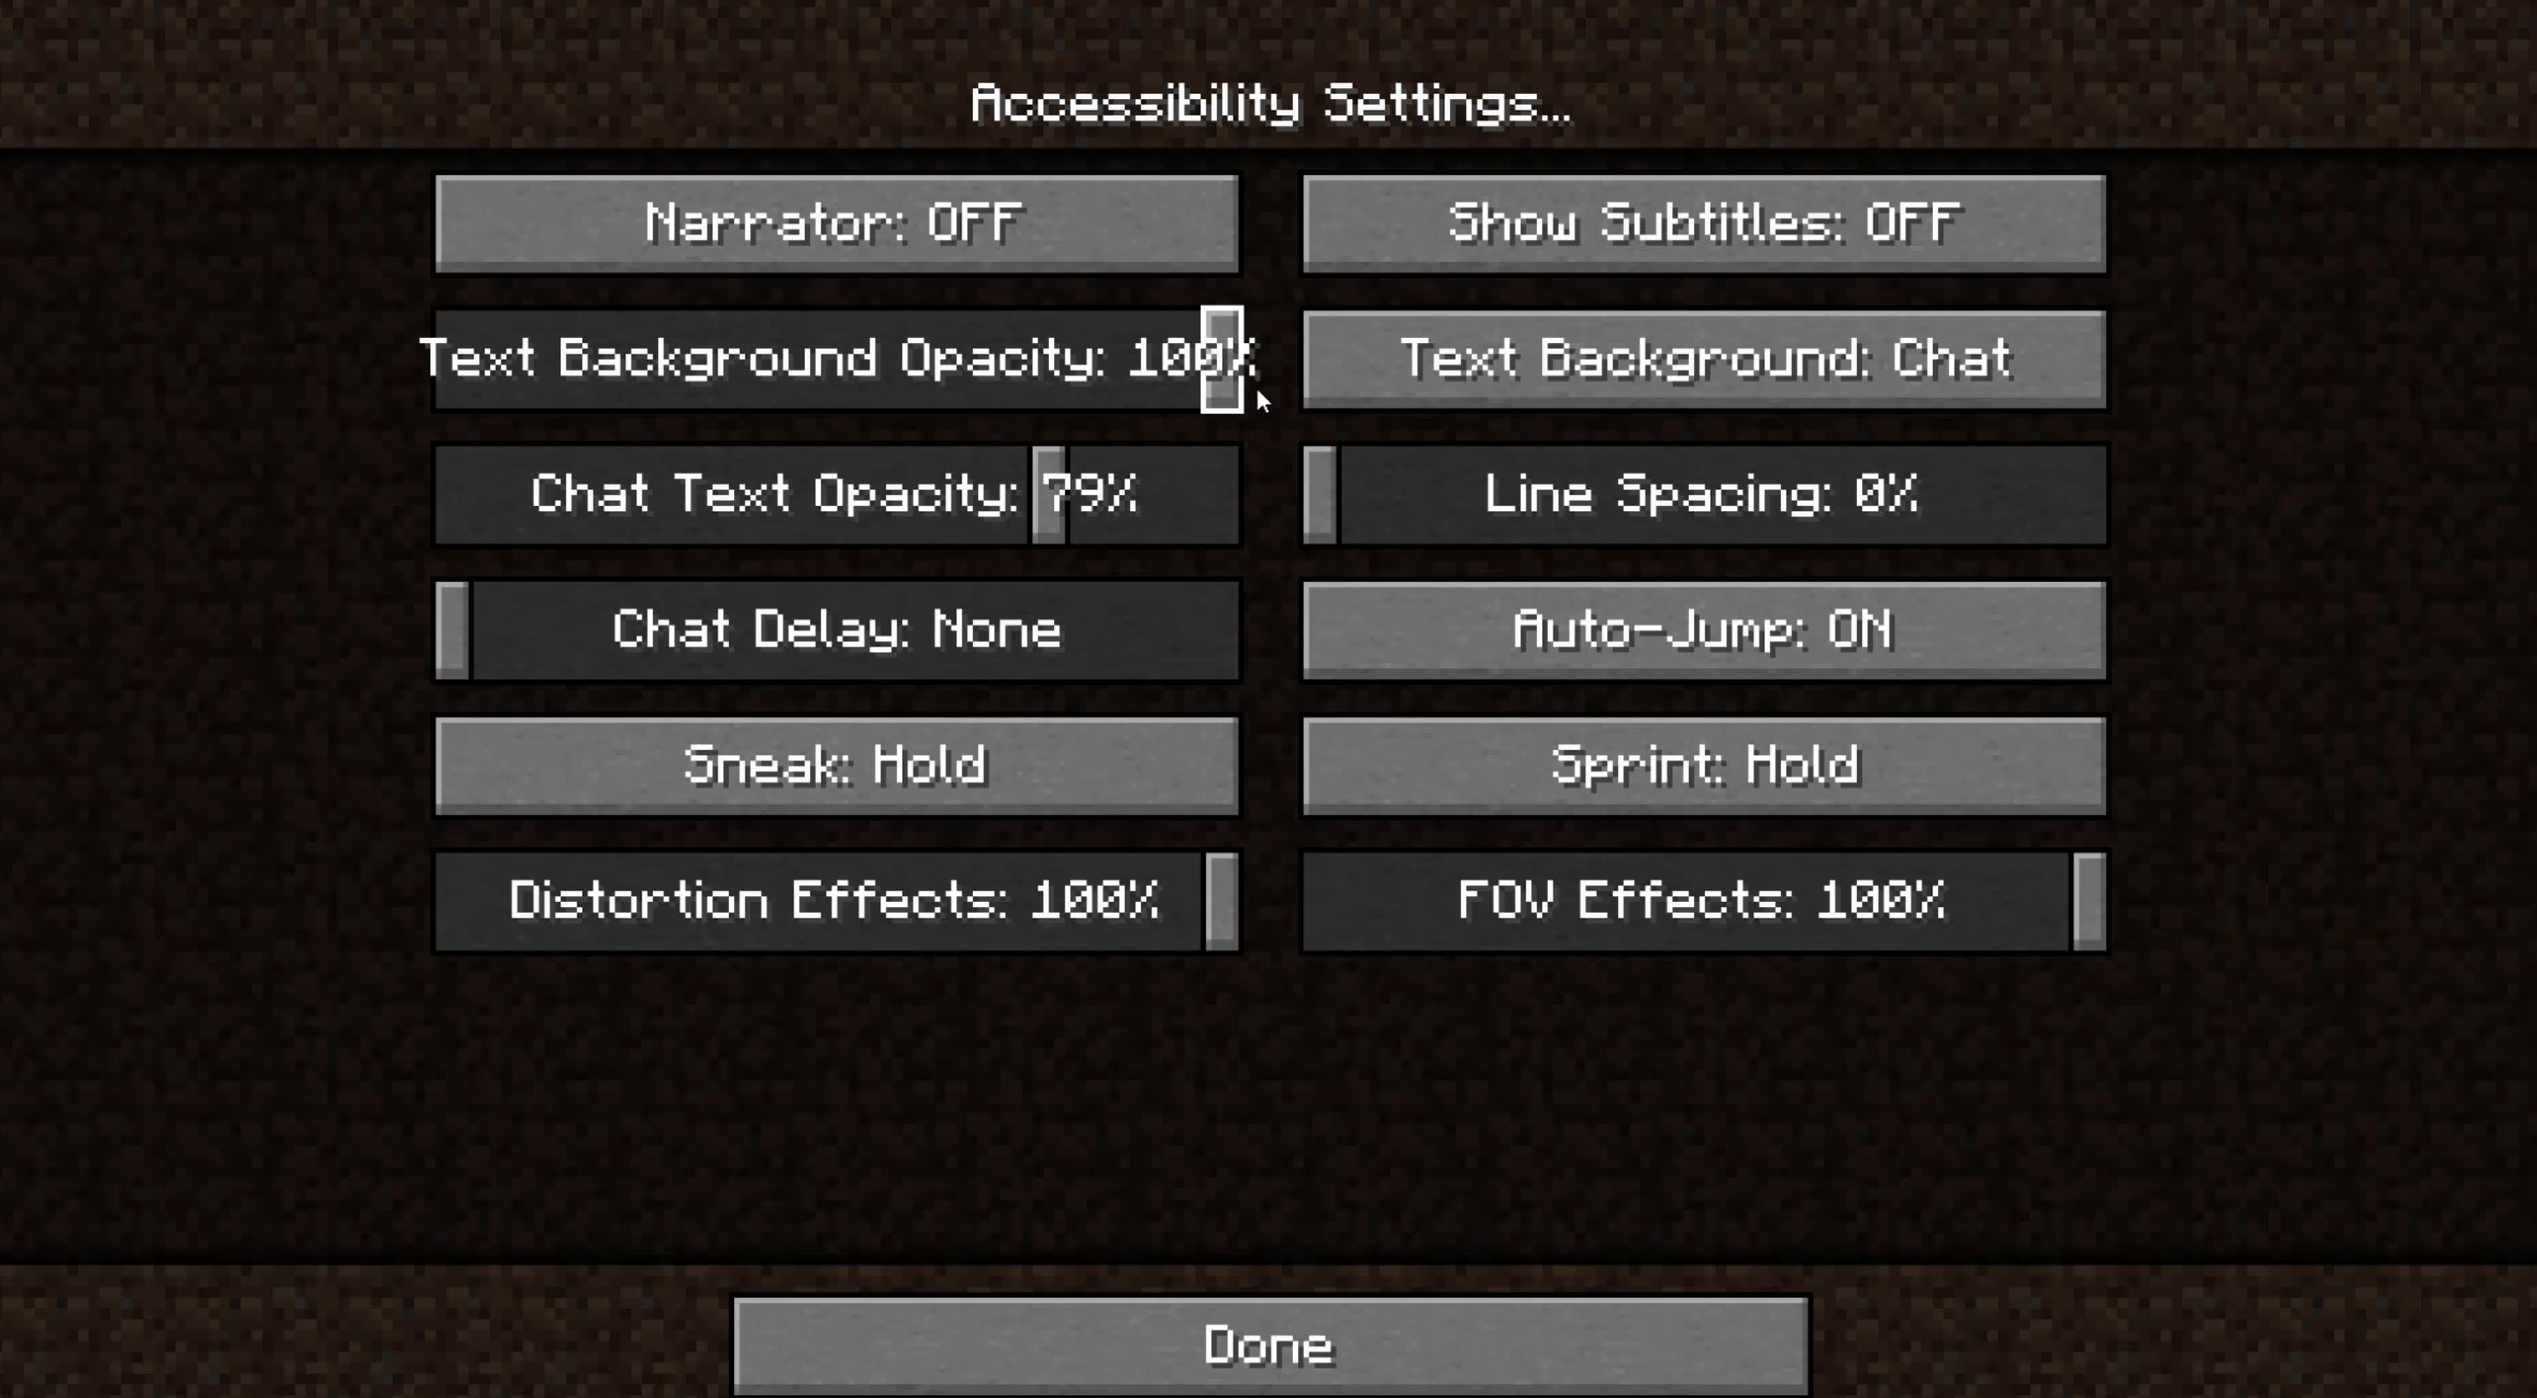 Minecraft Accessibility Settings menu. The slider for Text Background Opacity is set to 100%. The Text Background option is set to chat. The Chat Text Opacity slider is set to 79%.